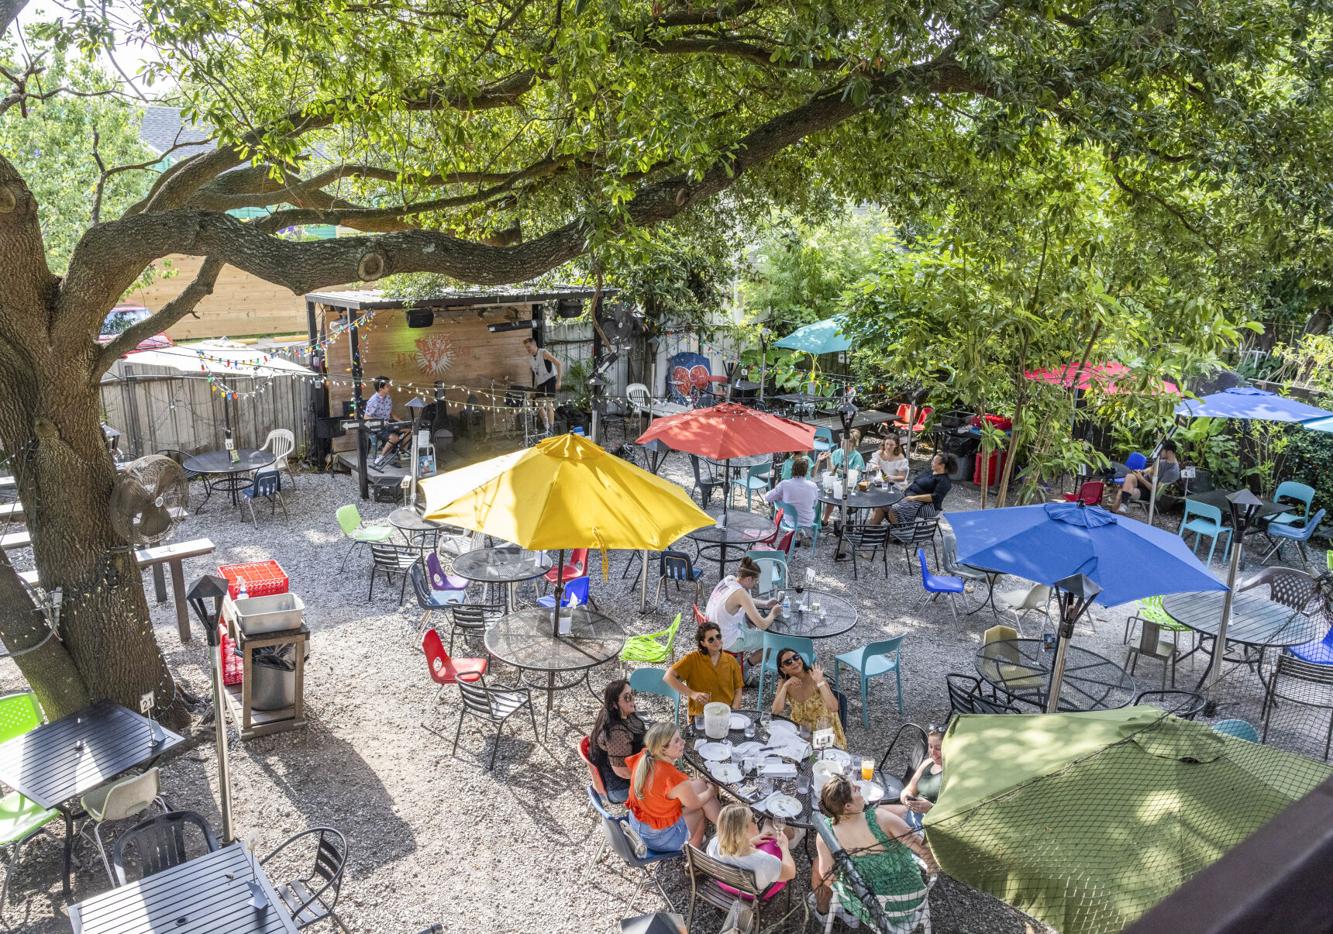 As Bacchanal turns 20, the Bywater ‘wine hang’ brings back part of its past